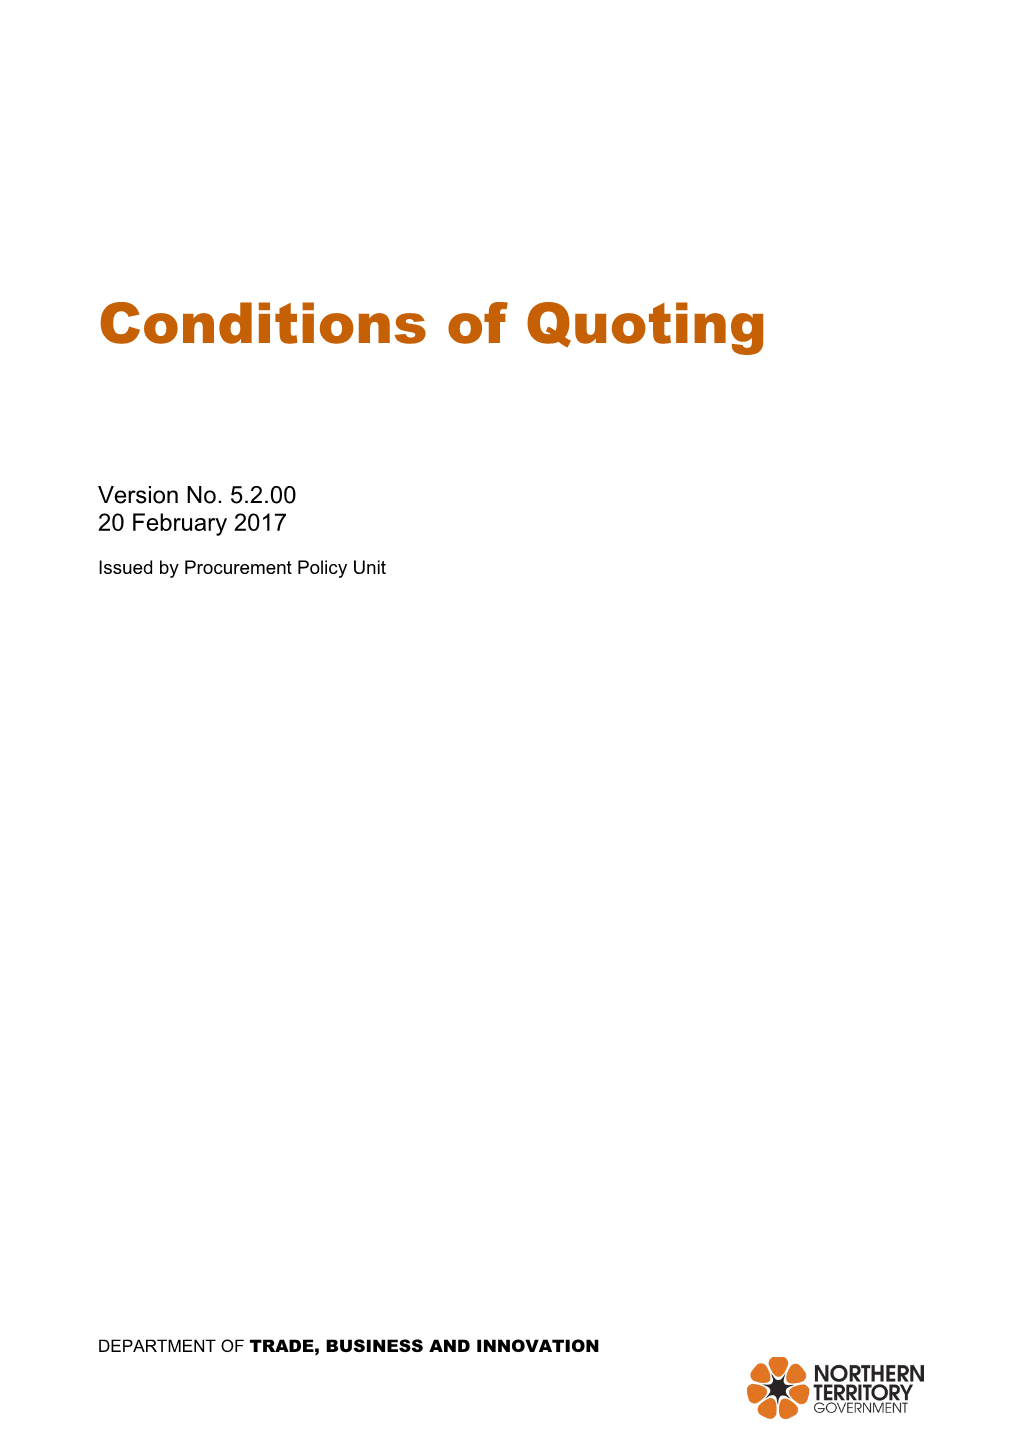 Conditions of Quoting